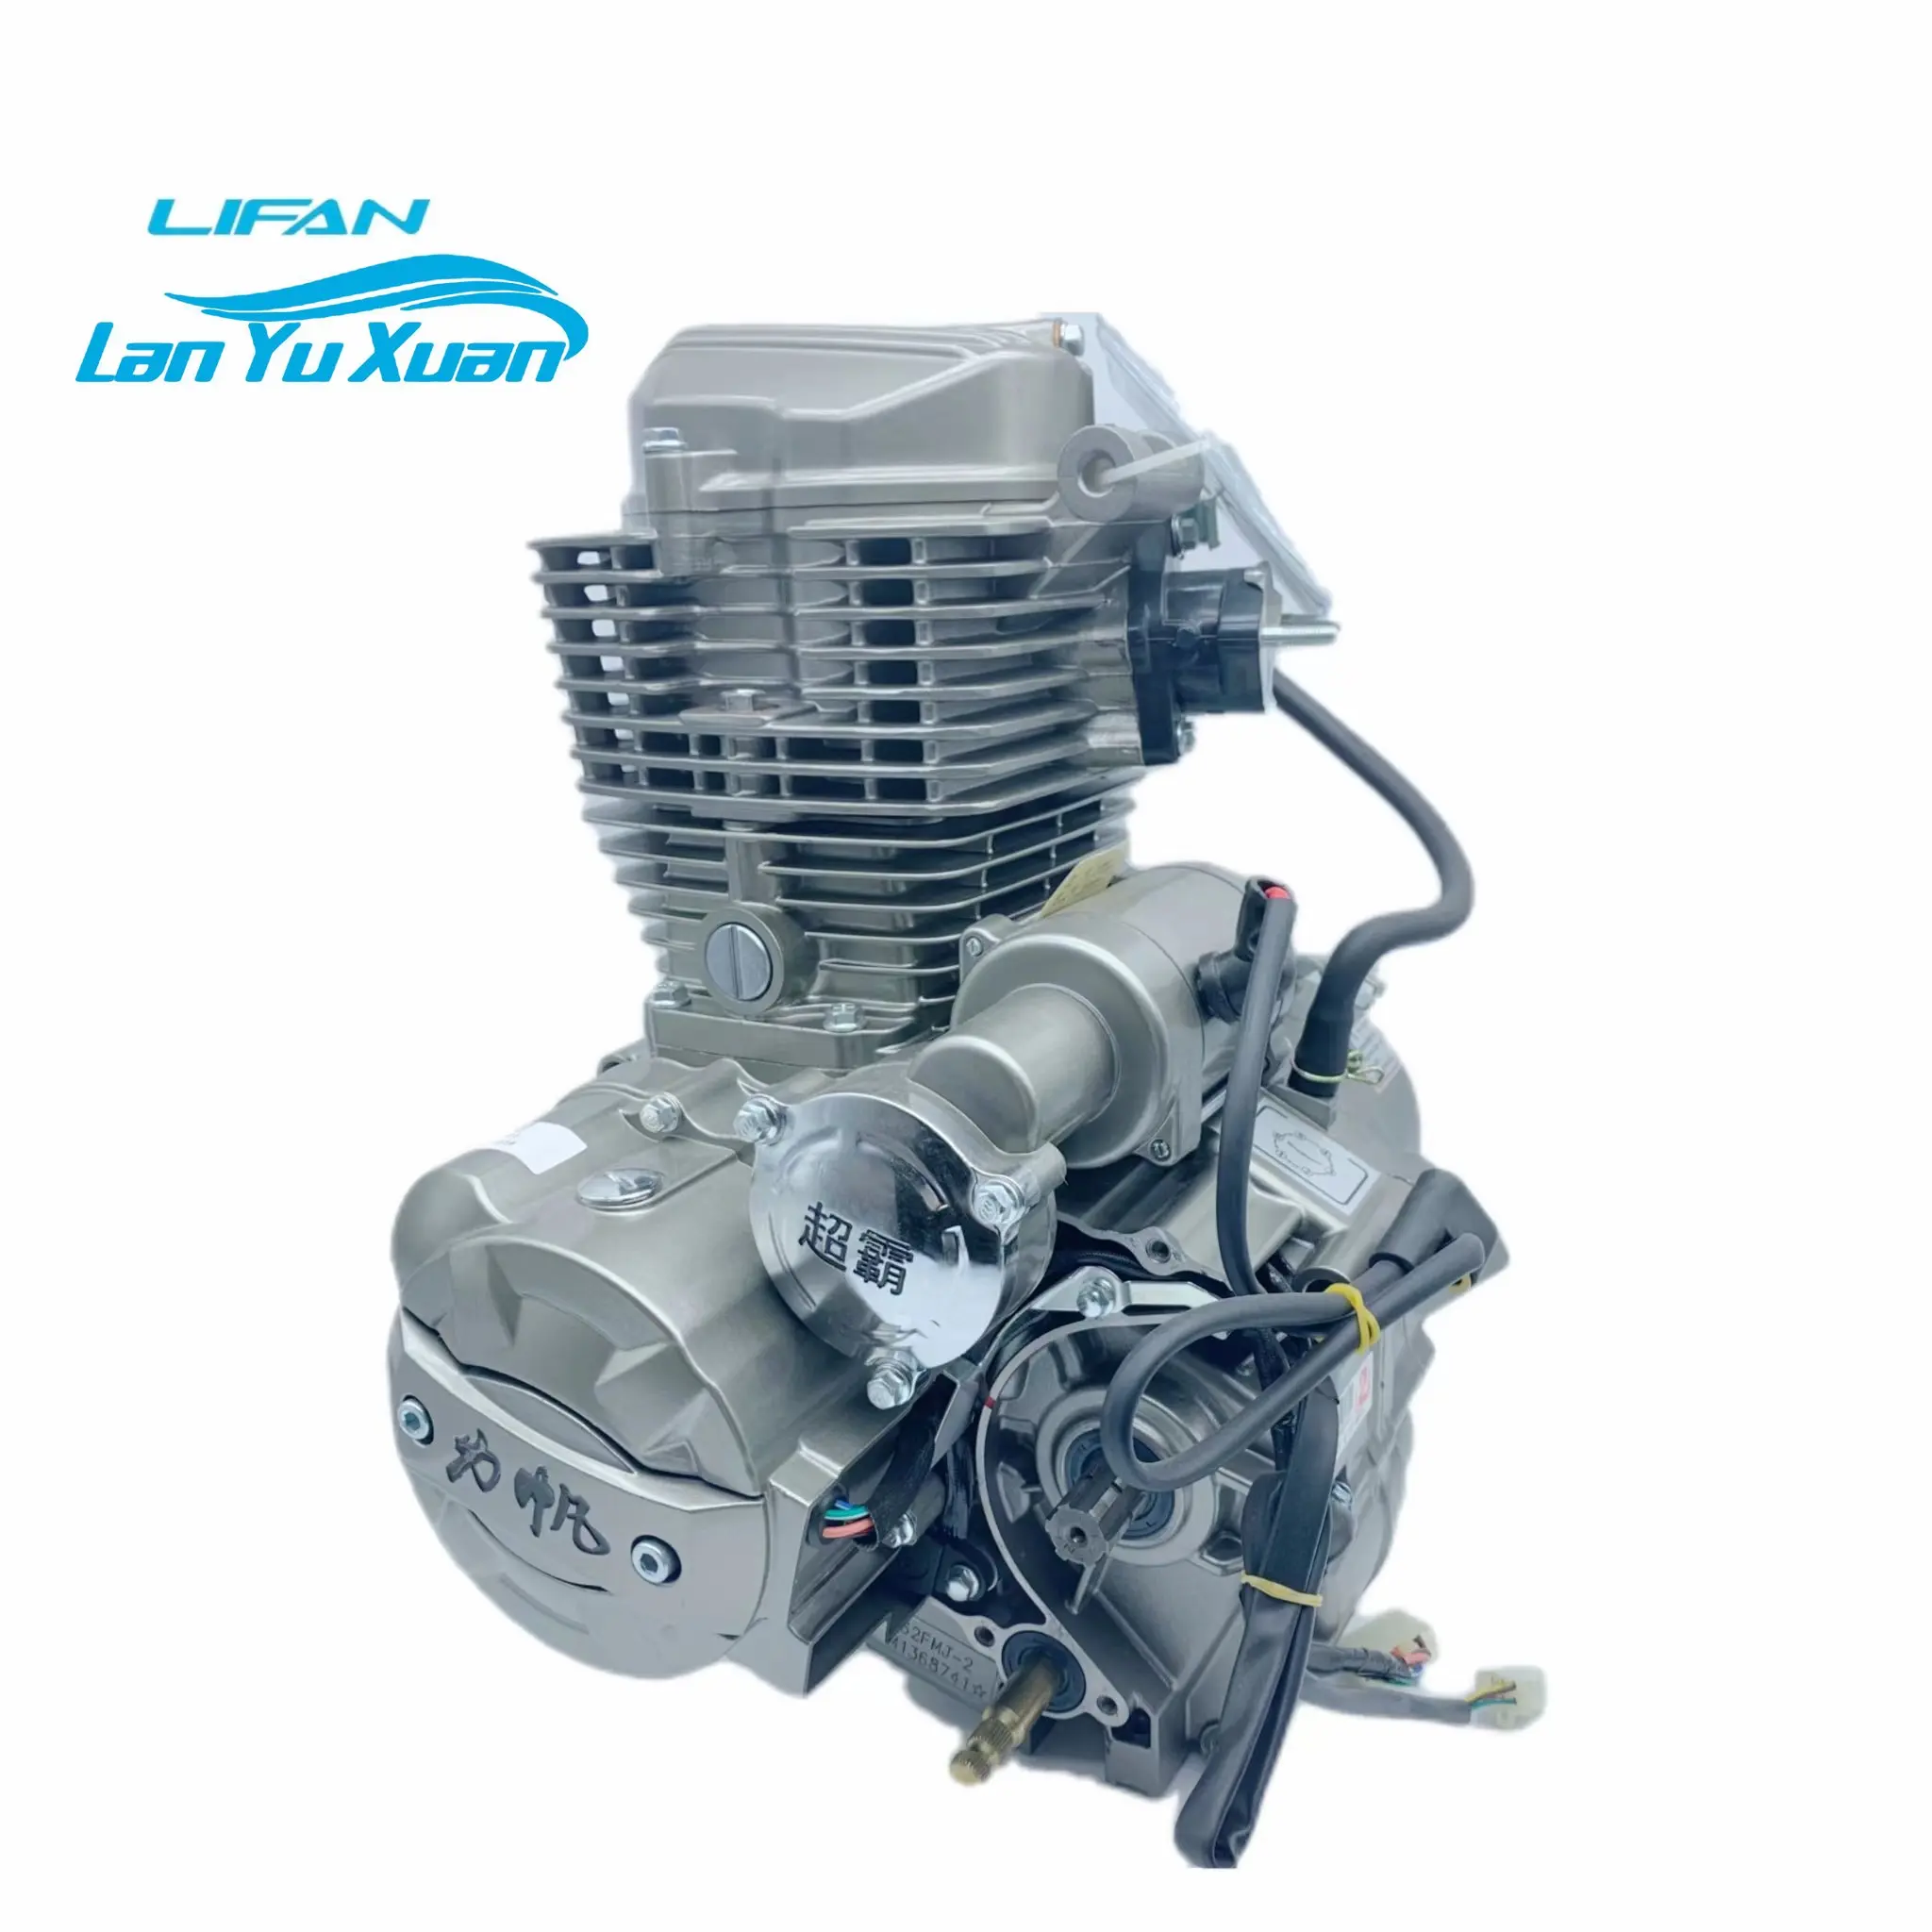 Hot selling Lifan motorcycle 250cc engine Engine motorcycle 250cc, China motorcycle Lifan engine tricycle suitable for freight cqjb 250cc haag engine 50cc motorcycle engine for 70cc cg 250cc engine 90cc zs 100cc 250cc utv 110cccustom